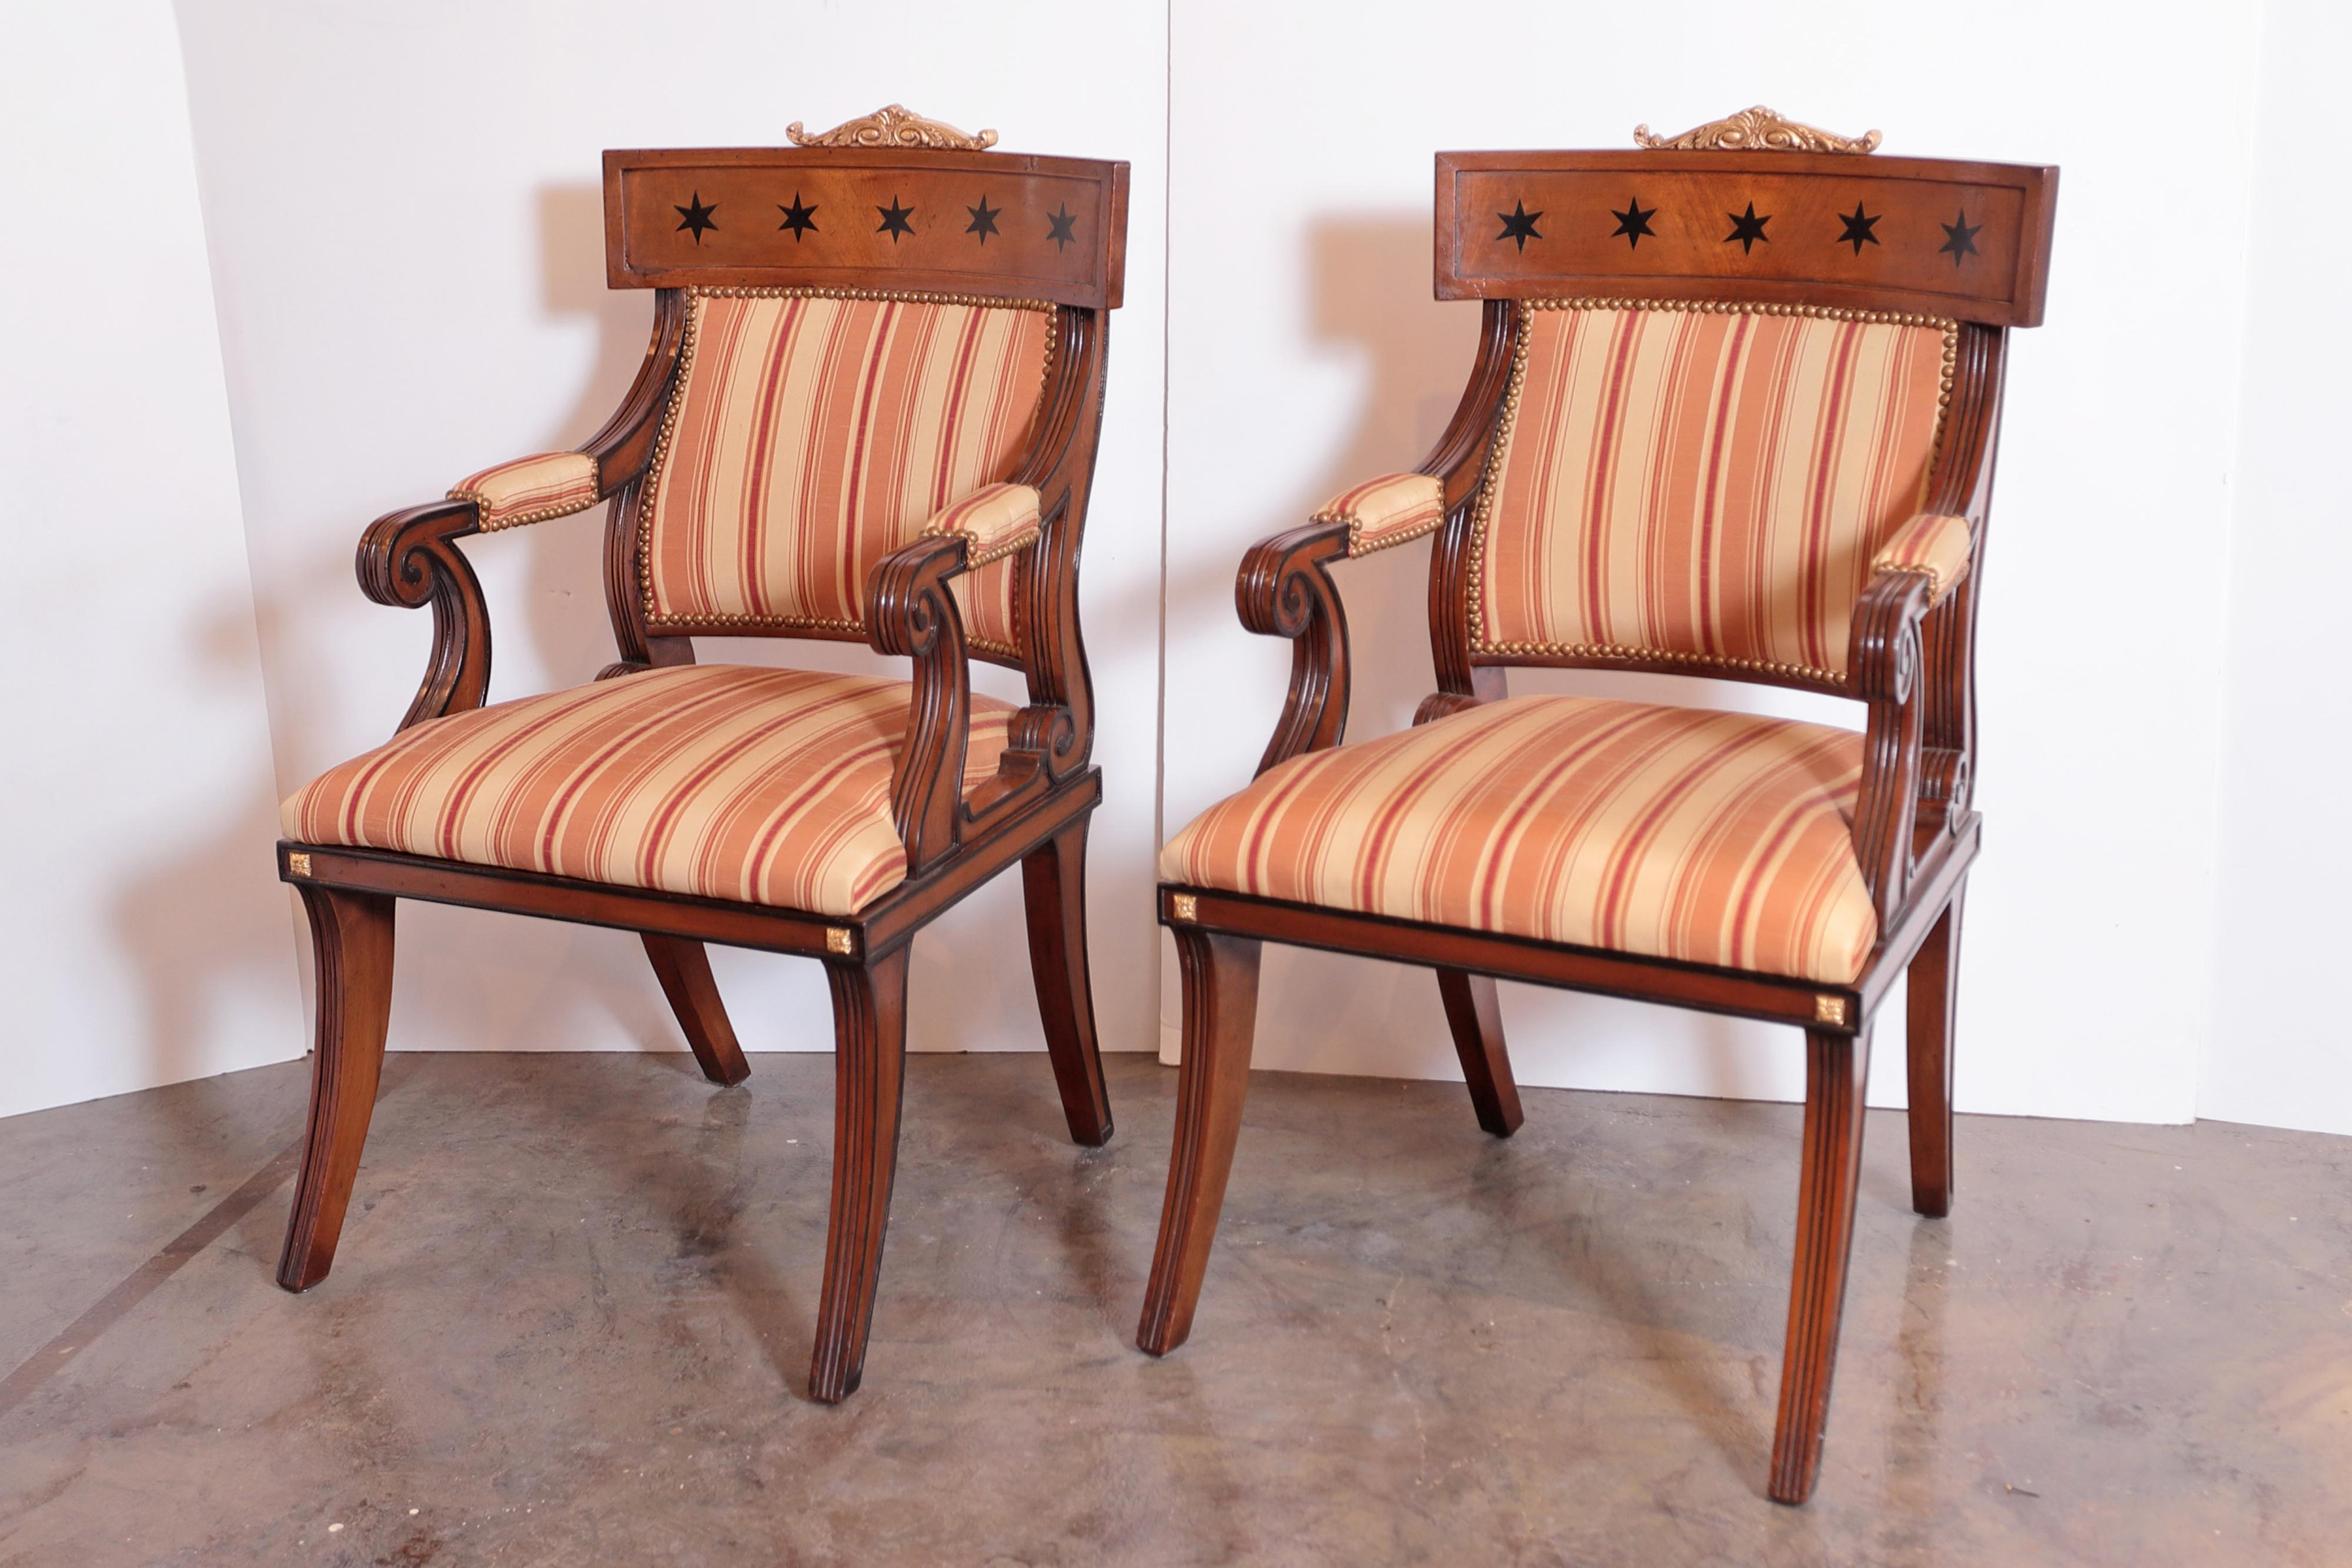 This is a rare set of English Regency style 20th century dining chairs. All arms these chairs are partial ebonized and partail gilt. Provenance England.